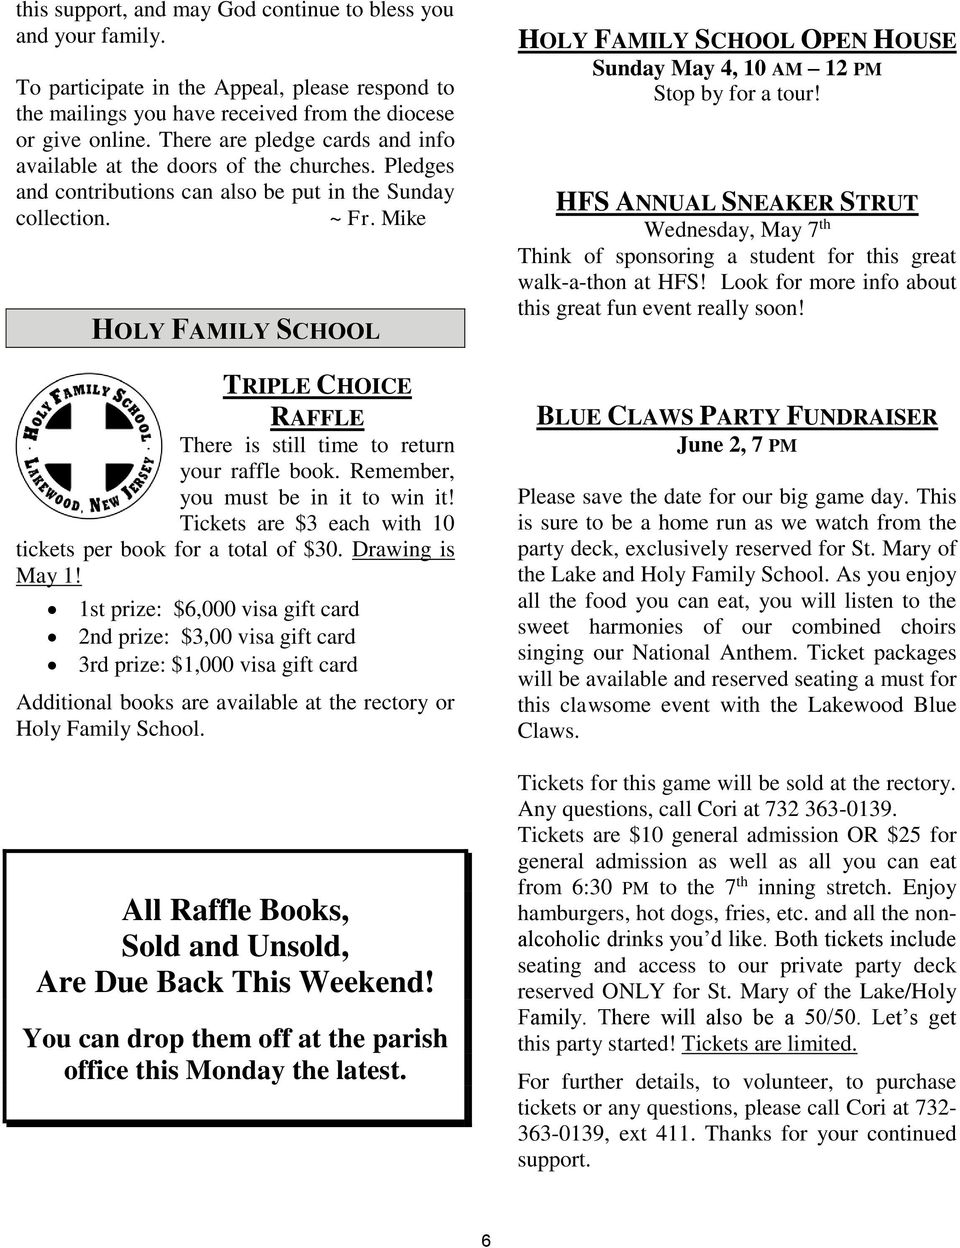 Mike HOLY FAMILY SCHOOL TRIPLE CHOICE RAFFLE There is still time to return your raffle book. Remember, you must be in it to win it! Tickets are $3 each with 10 tickets per book for a total of $30.